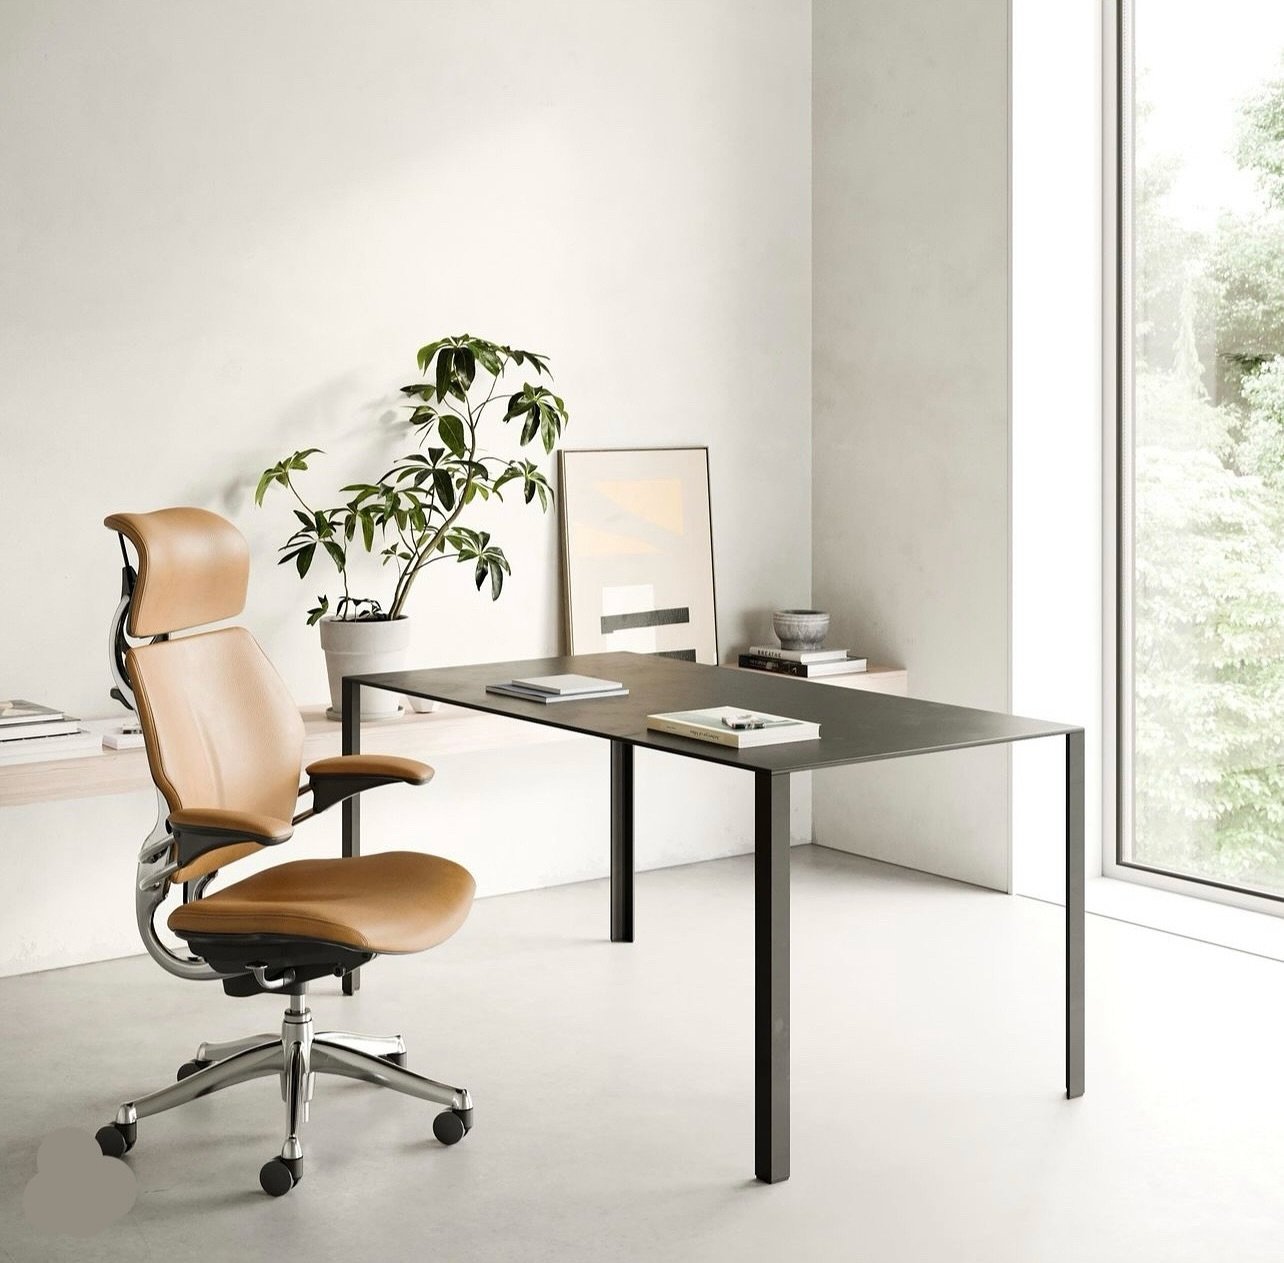 Sustainable Seating / @humanscalehq 

Pioneering sustainable seating solutions, Humanscale&rsquo;s ergonomically designed chairs meet the strictest sustainability standards and are third-party certified as climate positive &mdash; benefiting your hea